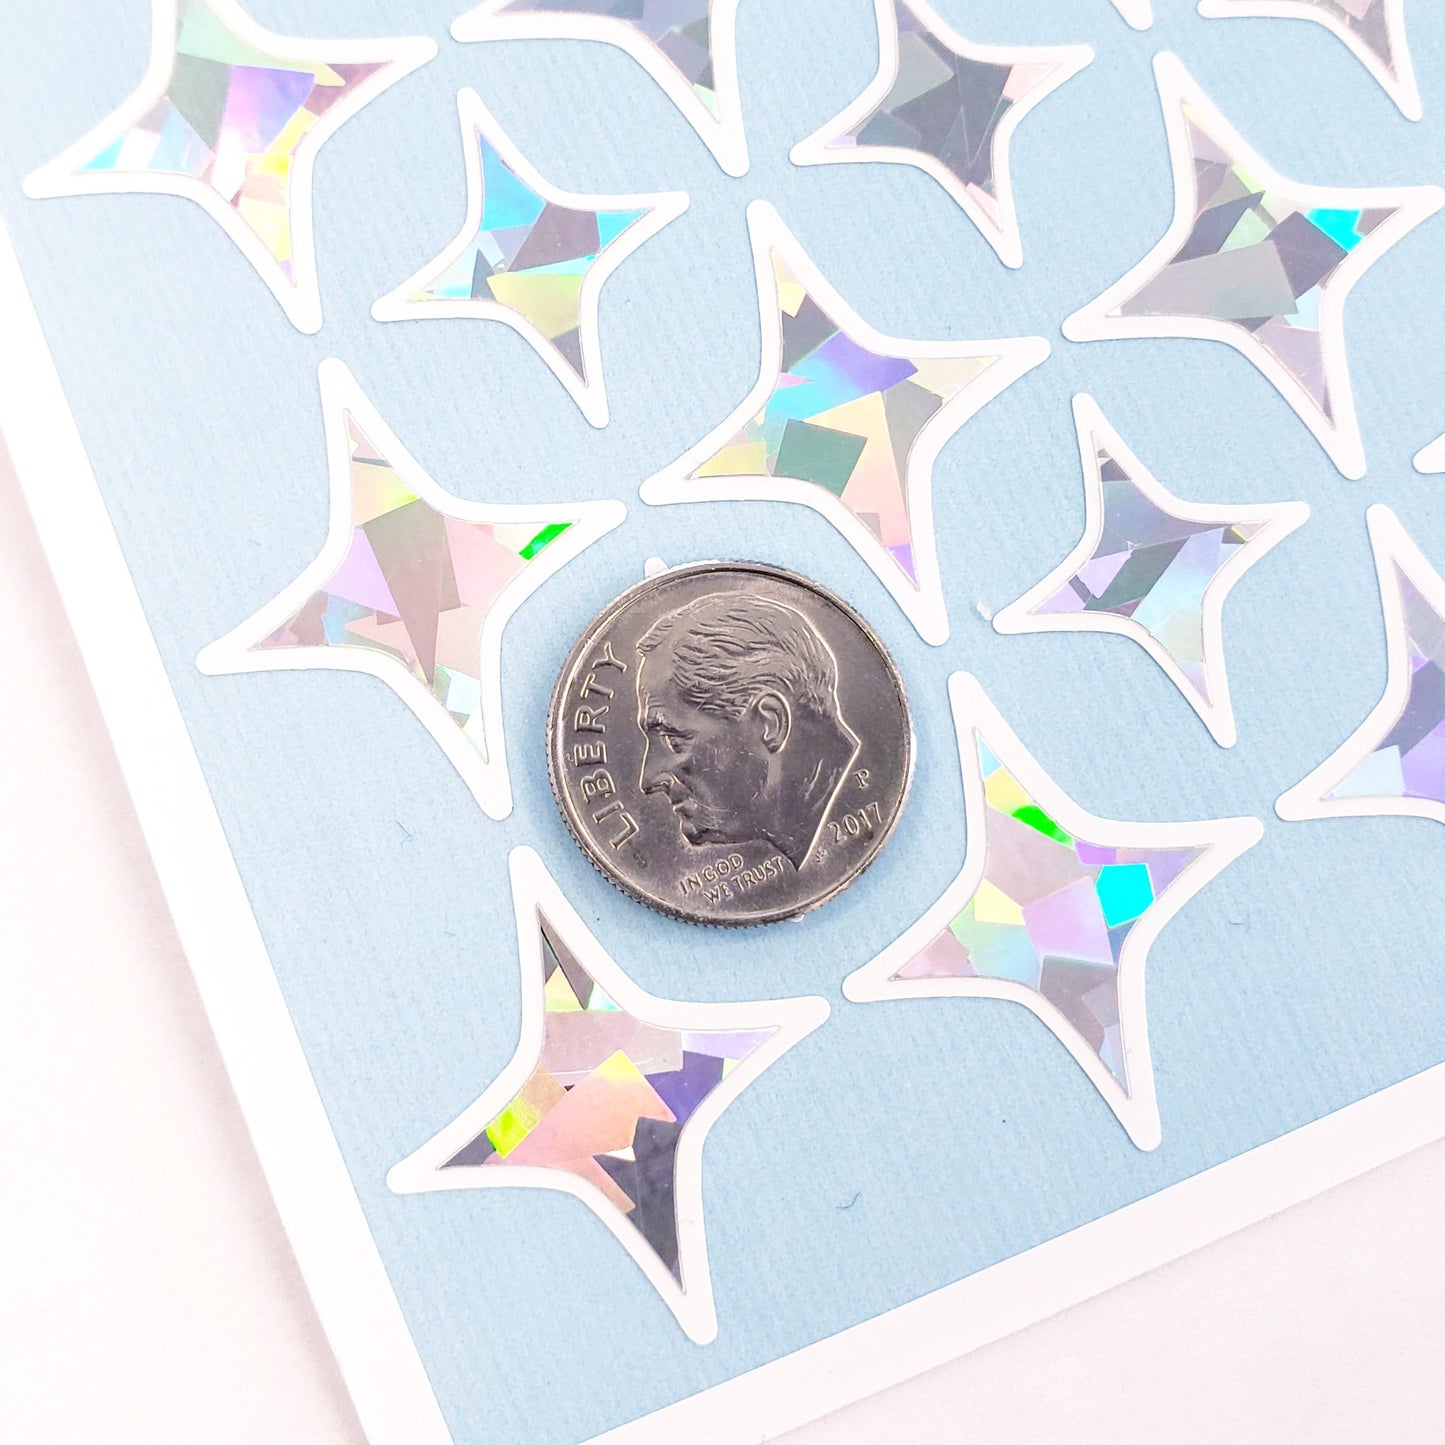 Sparkle Star Sticker Sheet, set of 50 small holographic vinyl stars for tumblers, journals, scrapbook pages and craft projects